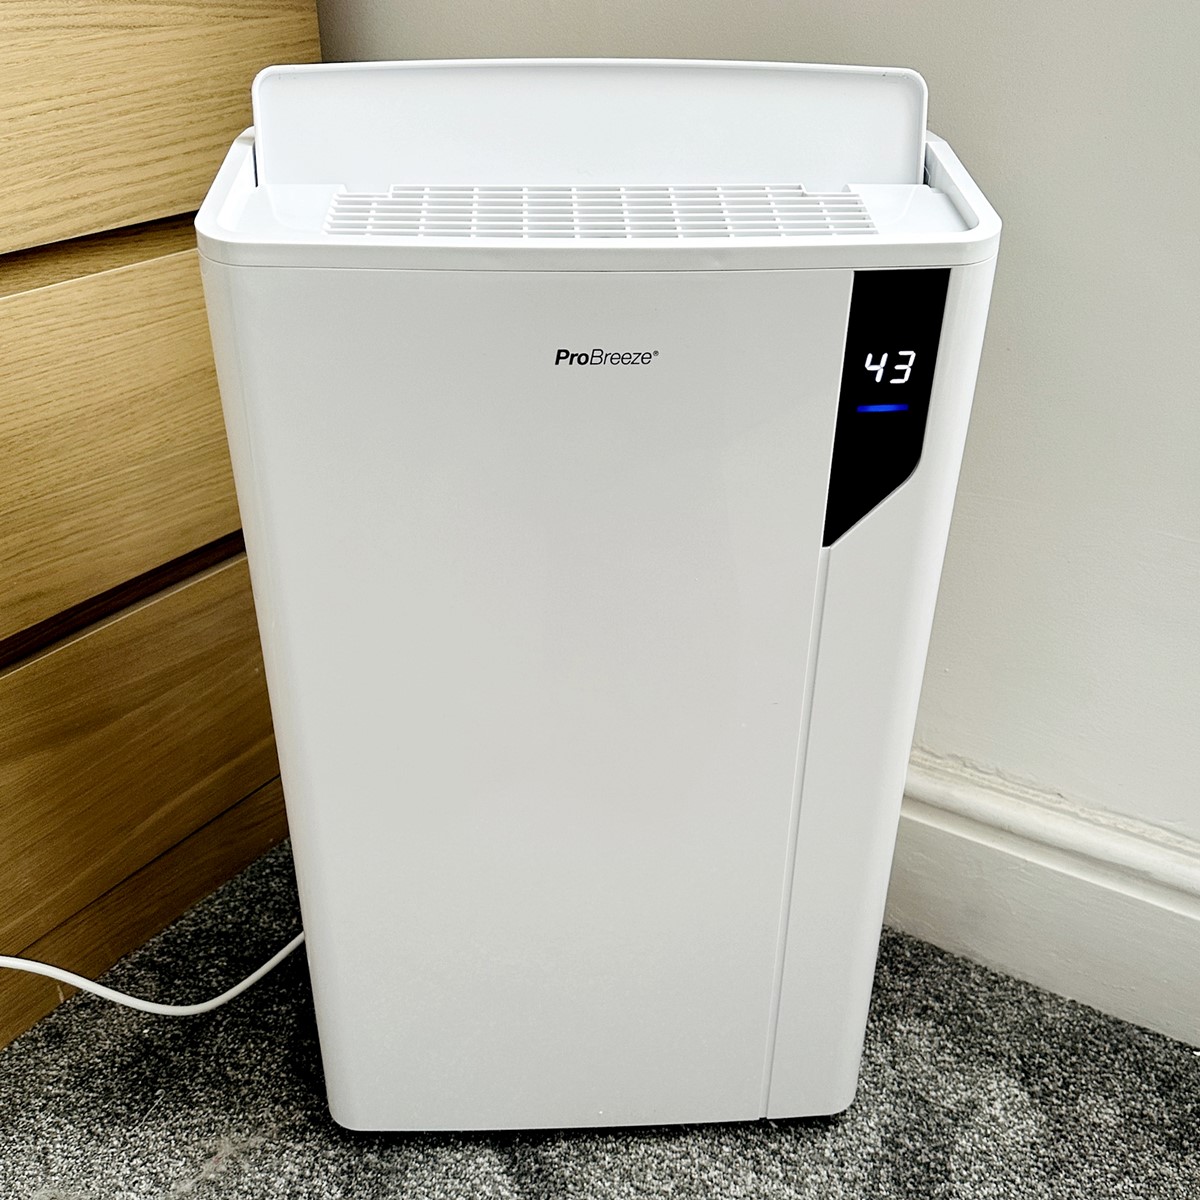  Pro Breeze 50 Pint Dehumidifier - 3,500 4,000 Sq Ft  Dehumidifiers for Home Large Room Basements with Humidity Sensor, Auto Shut  Off, Continuous Drainage Hose, Removes Moisture, Ideal for Basement